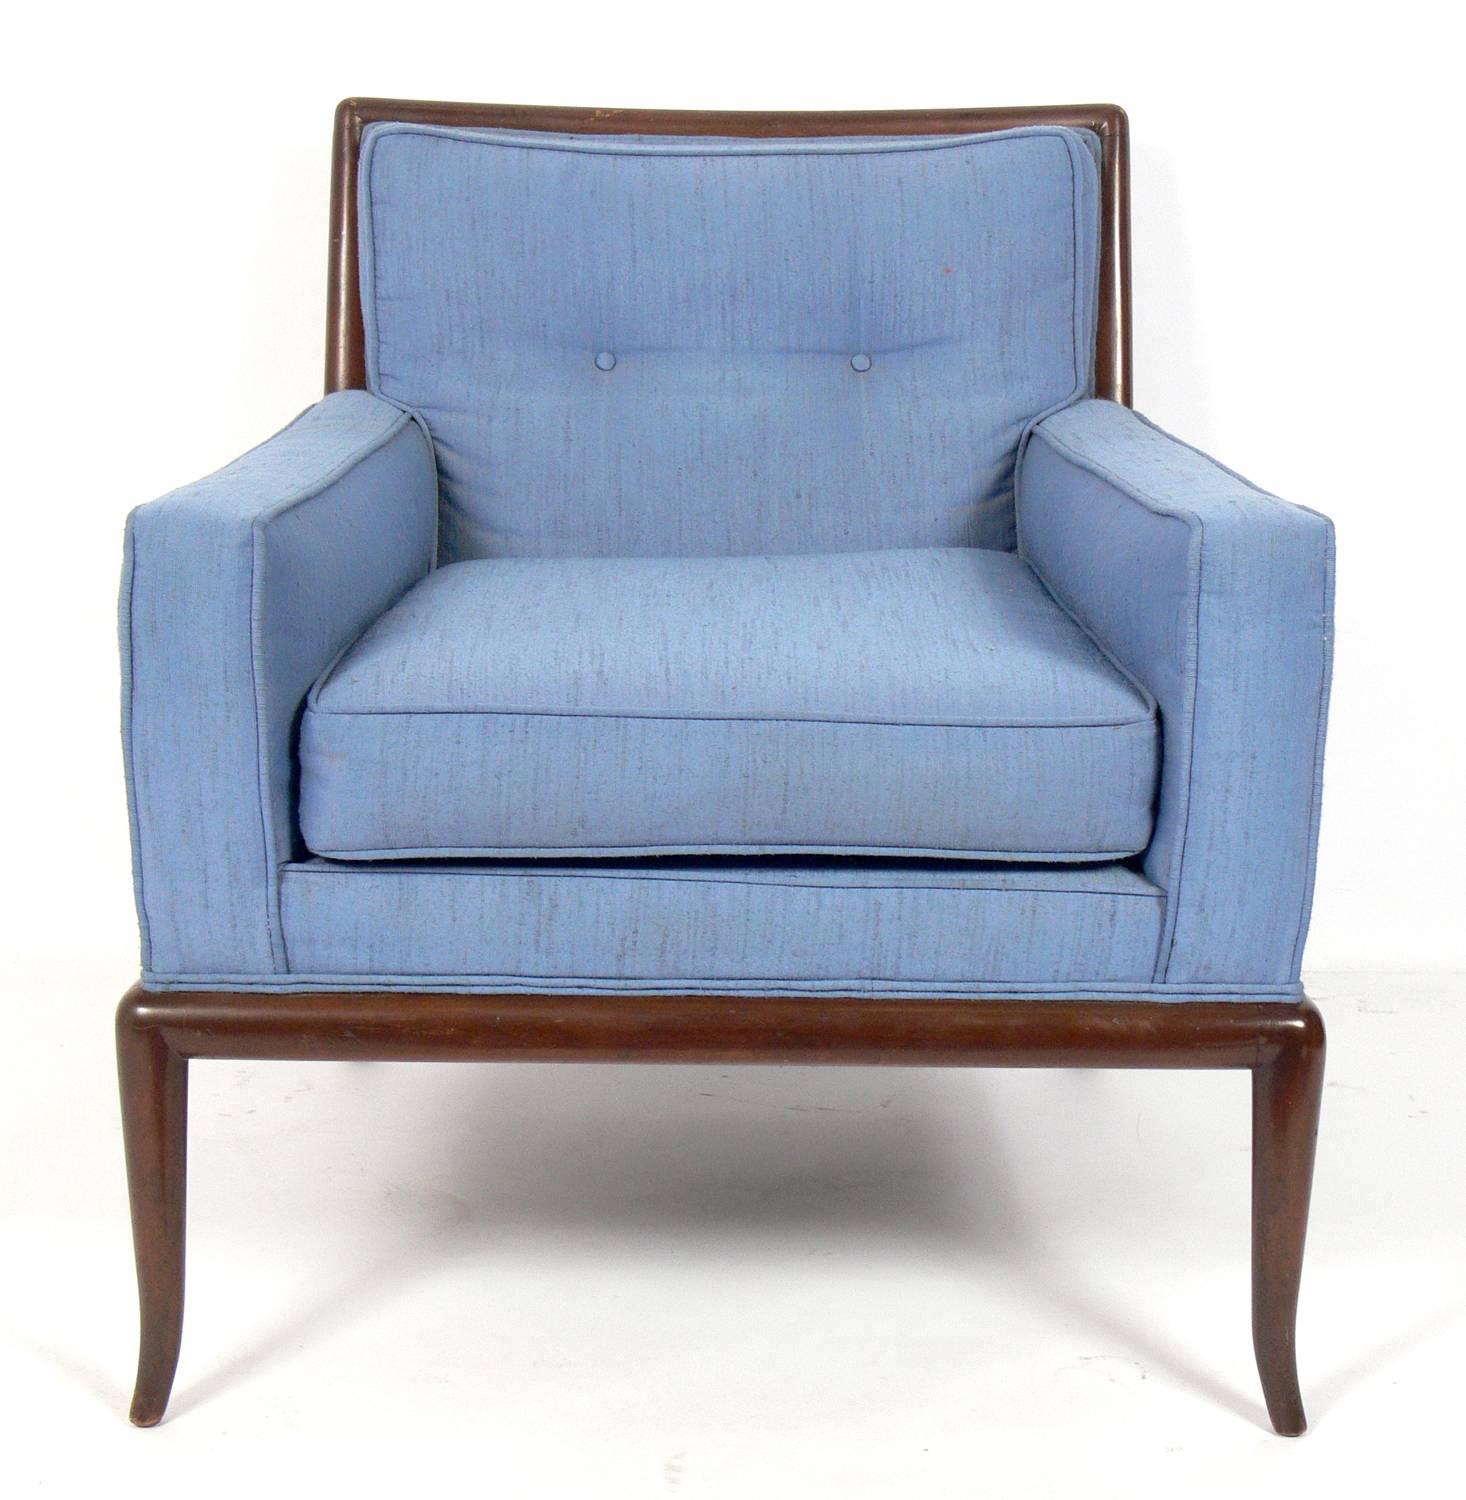 Pair of elegant lounge chairs, designed by T.H. Robsjohn Gibbings for Widdicomb, American, circa 1950s. These chairs are currently being refinished and reupholstered and can be completed in your choice of finish color and reupholstered in your